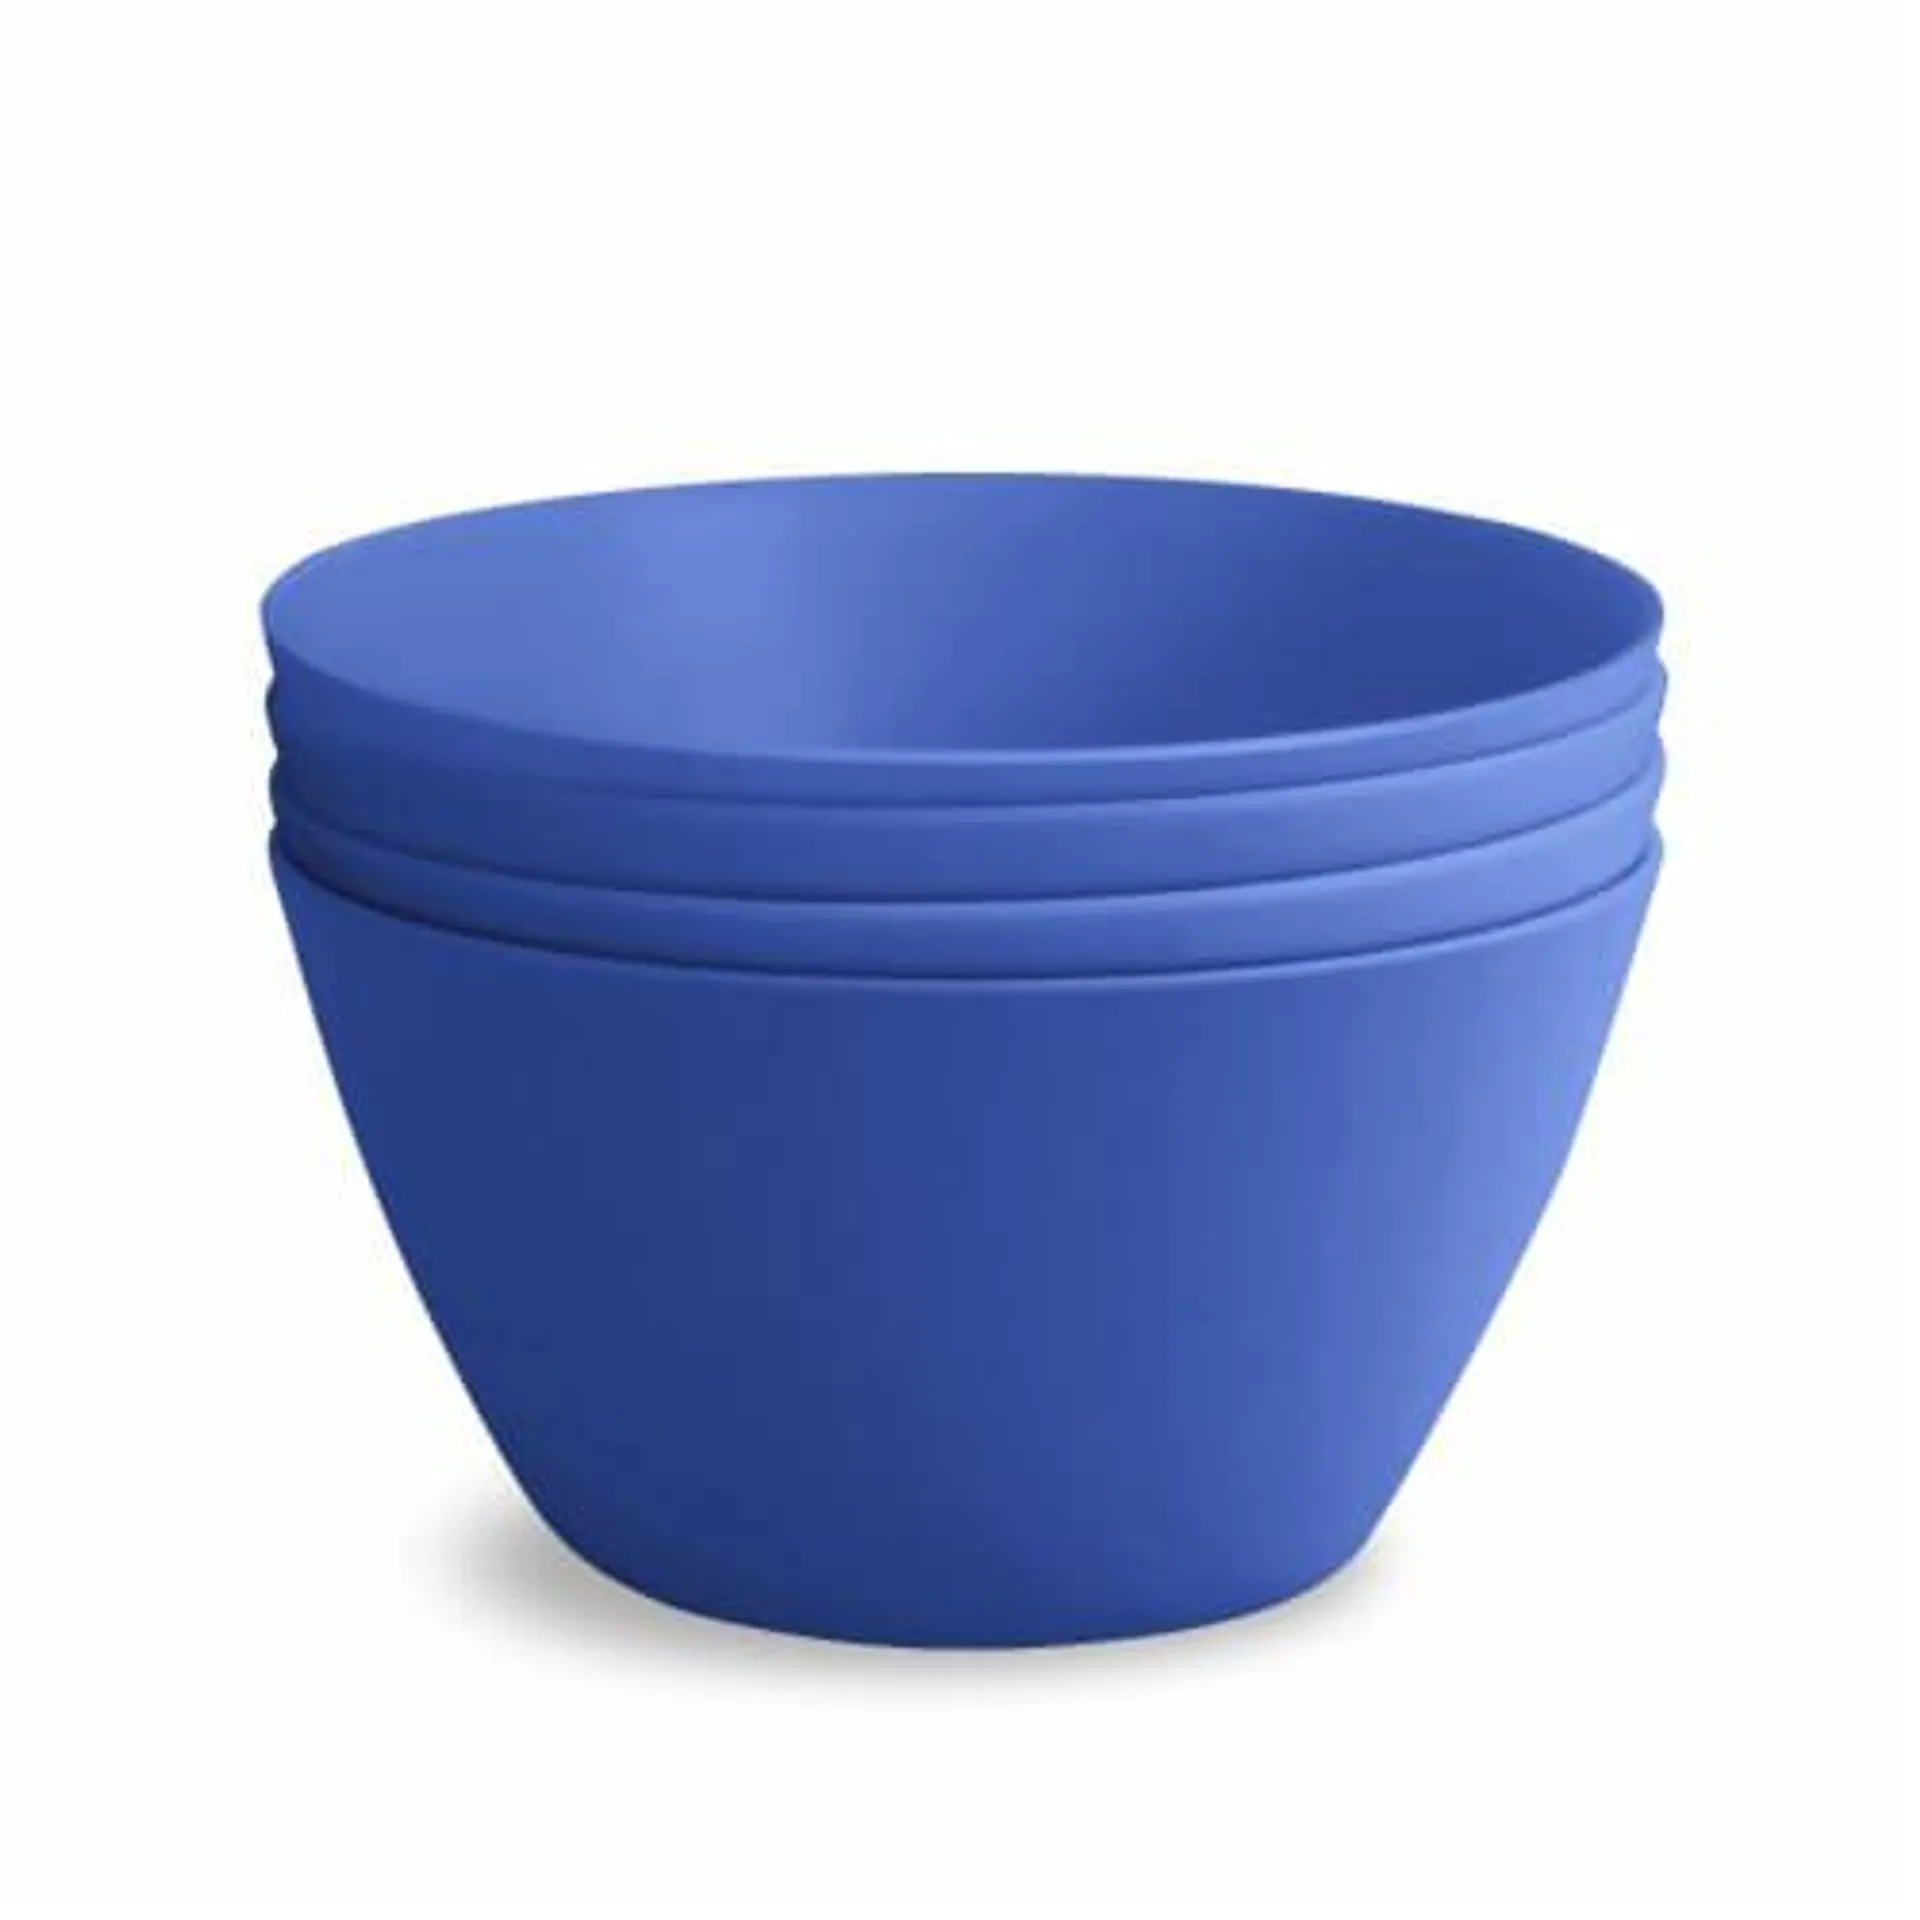 HD Designs Outdoors Cereal Bowls - Royal Blue